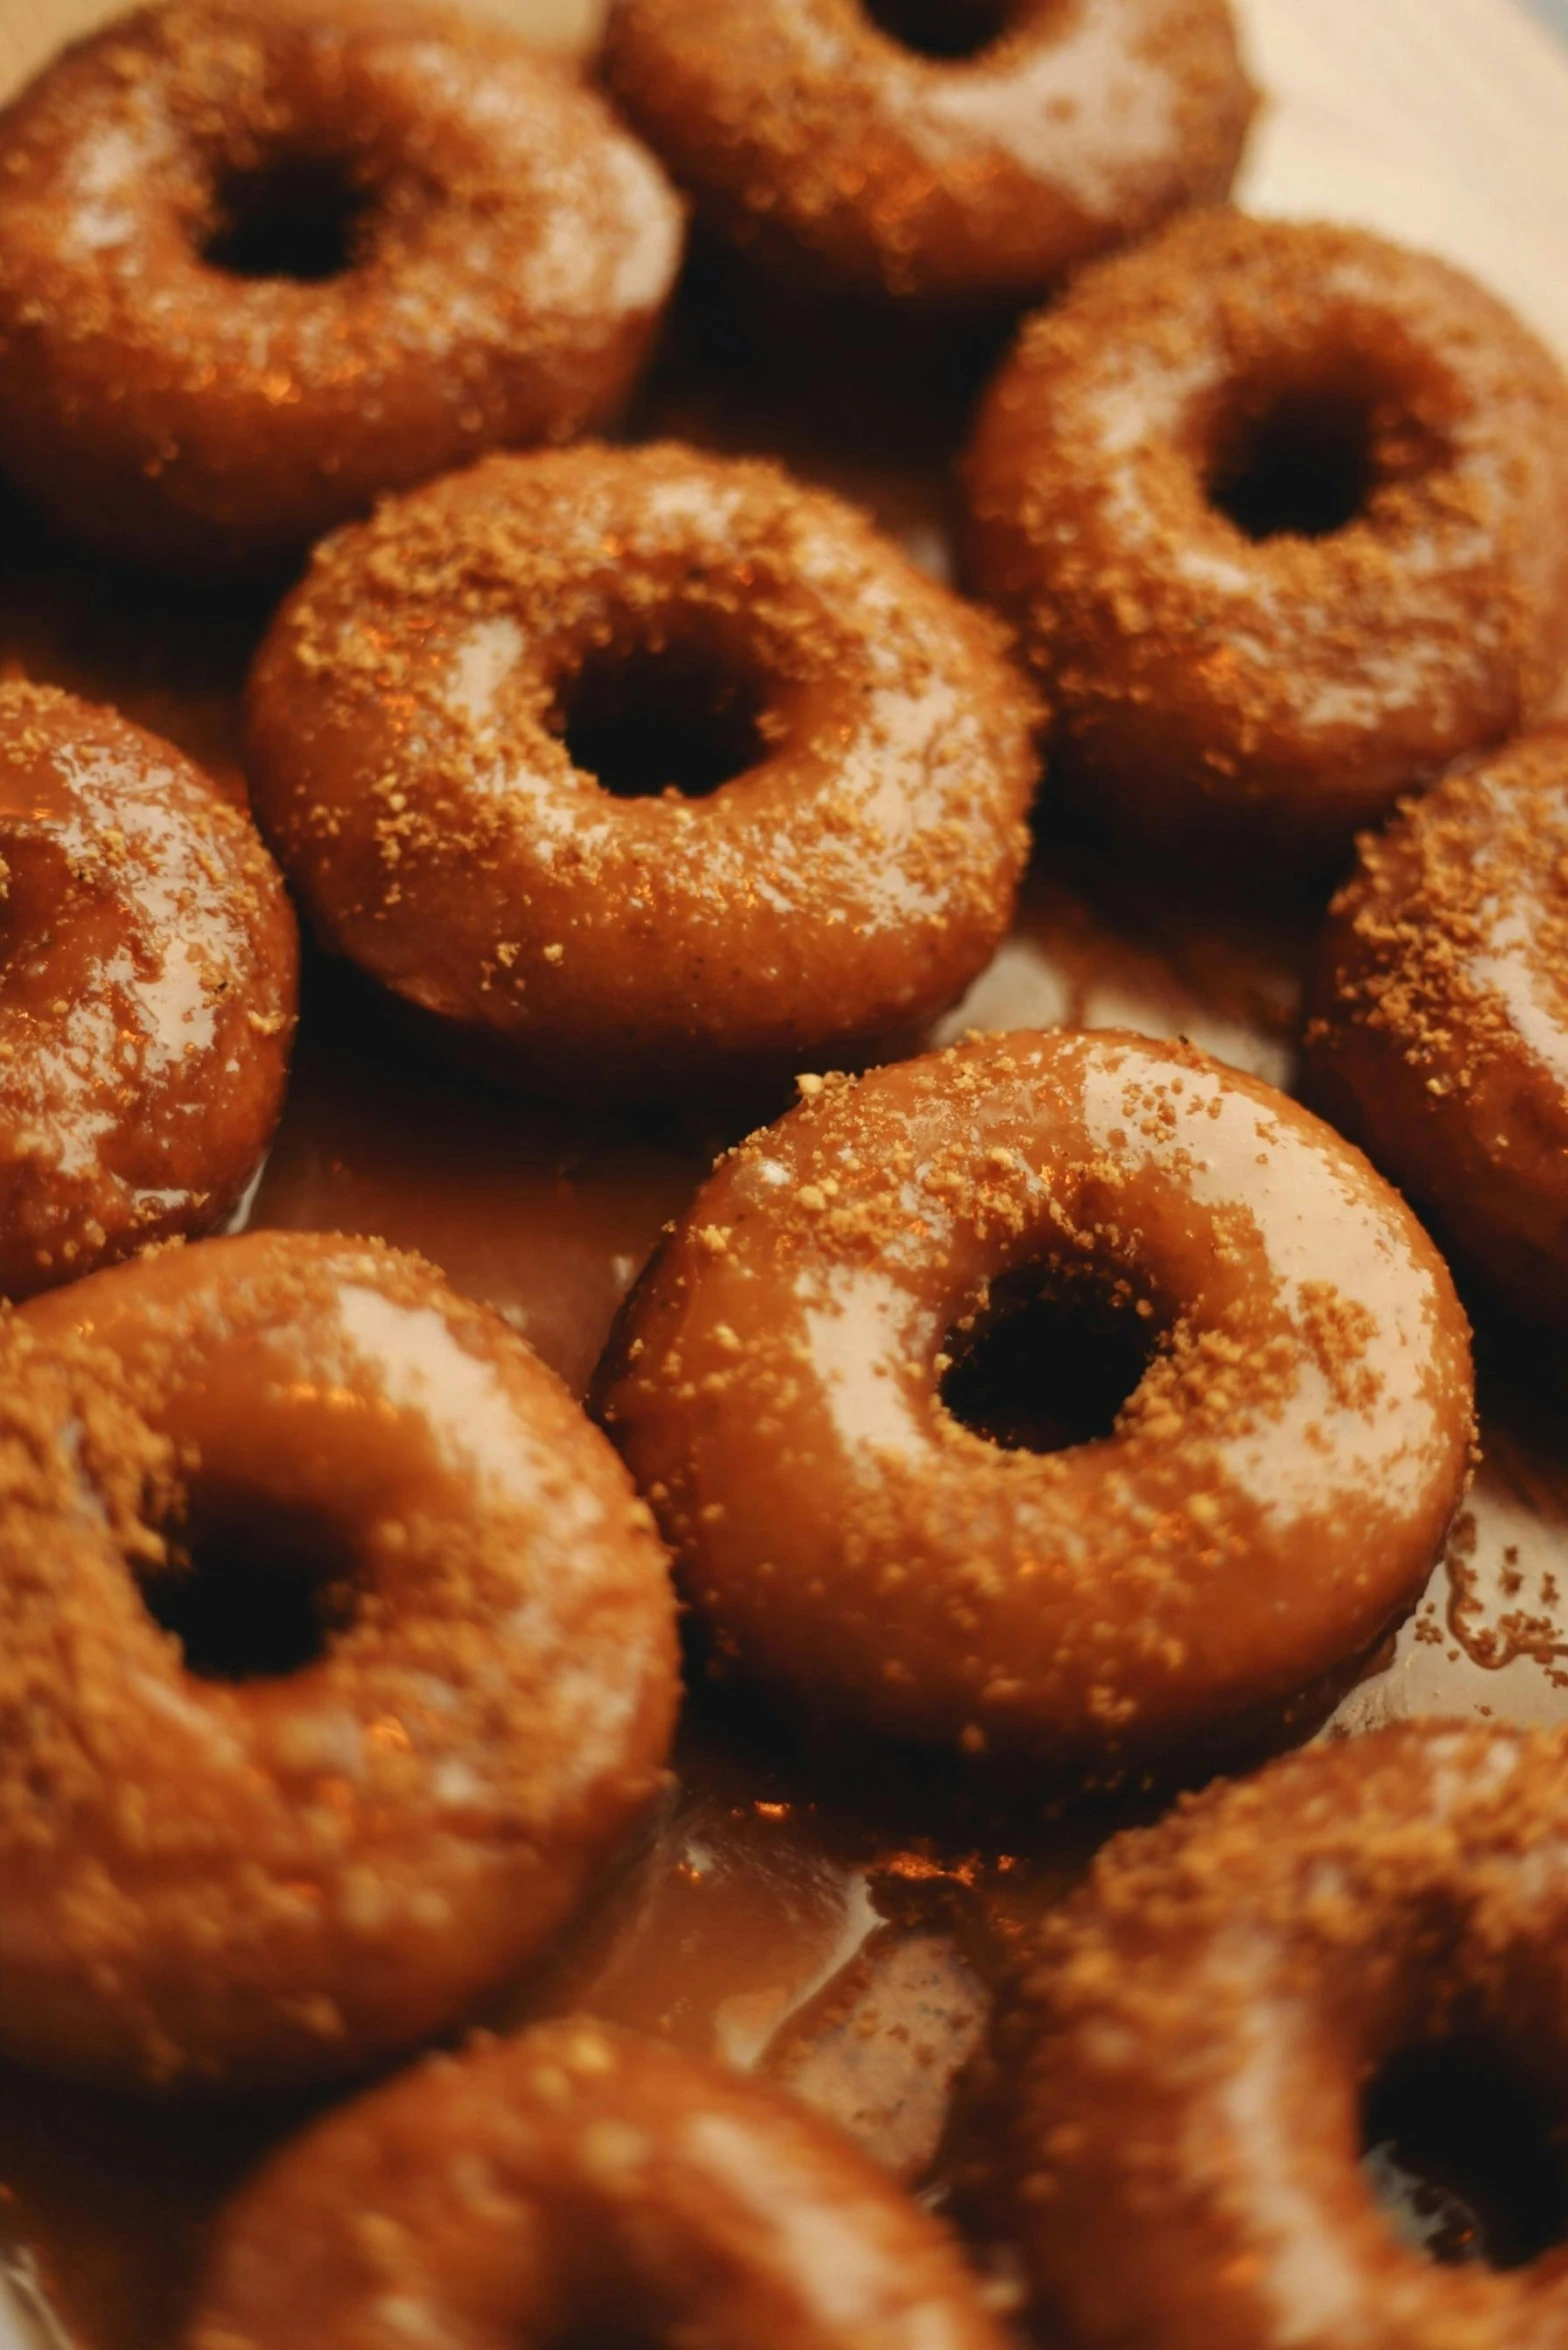 a close up of a plate of doughnuts on a table, brown mud, cinnamon skin color, demon days, ignant